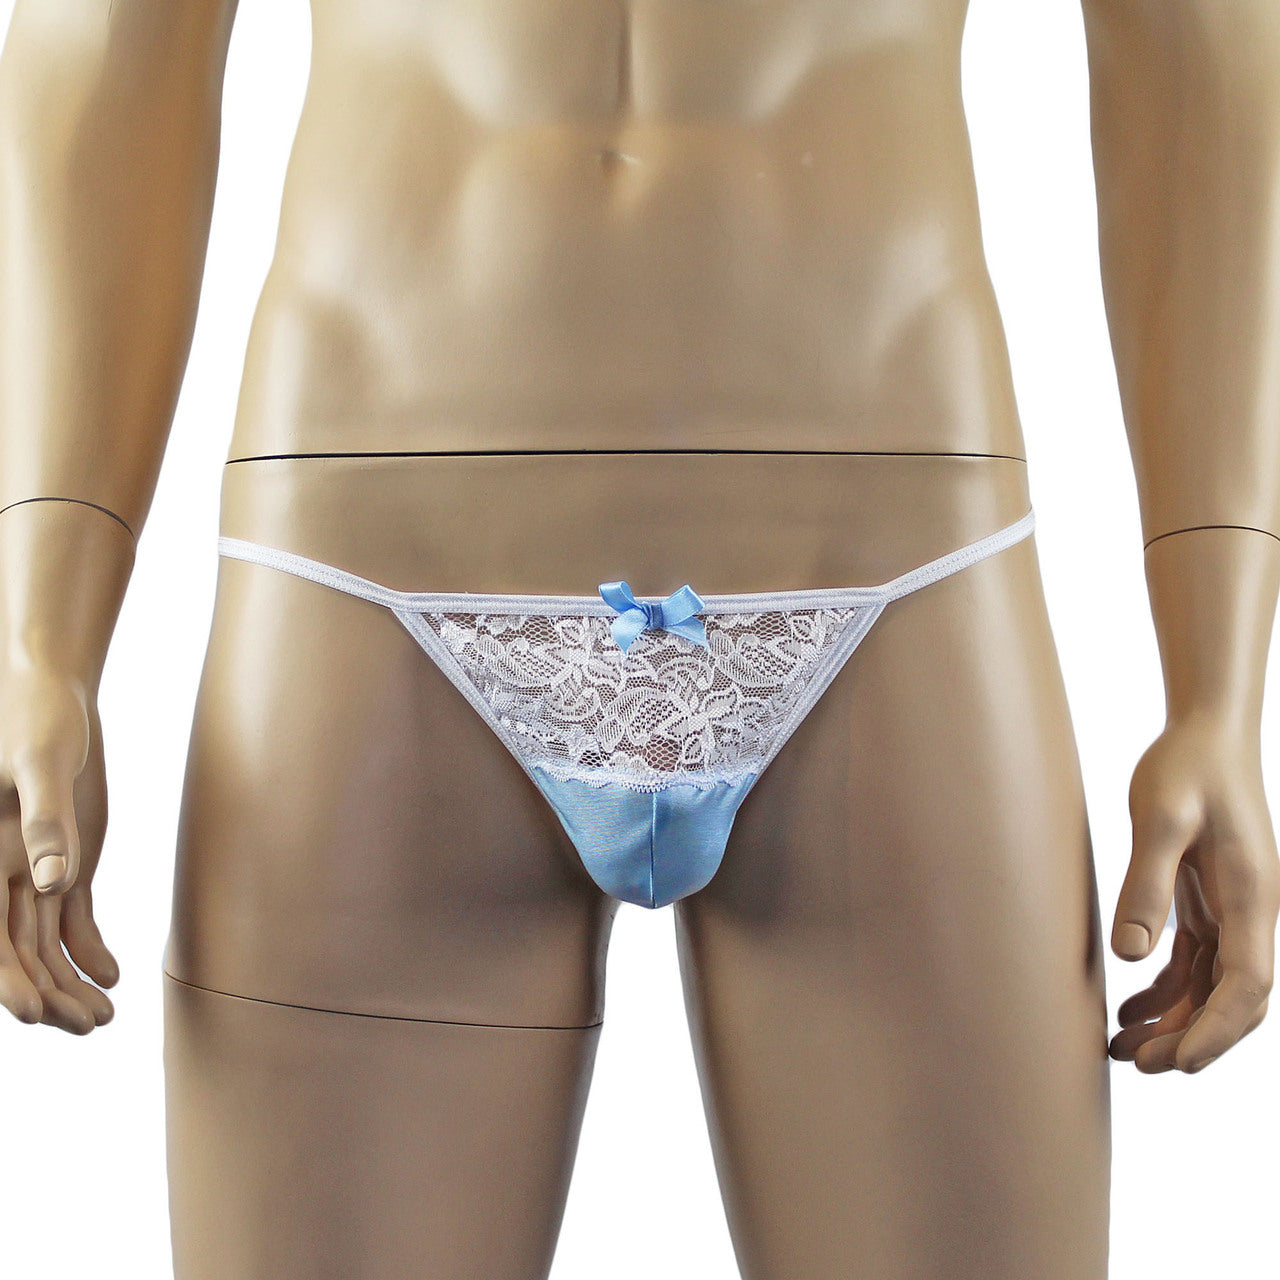 Mens Joanne Lacey G string with Bow Light Blue and White Lace